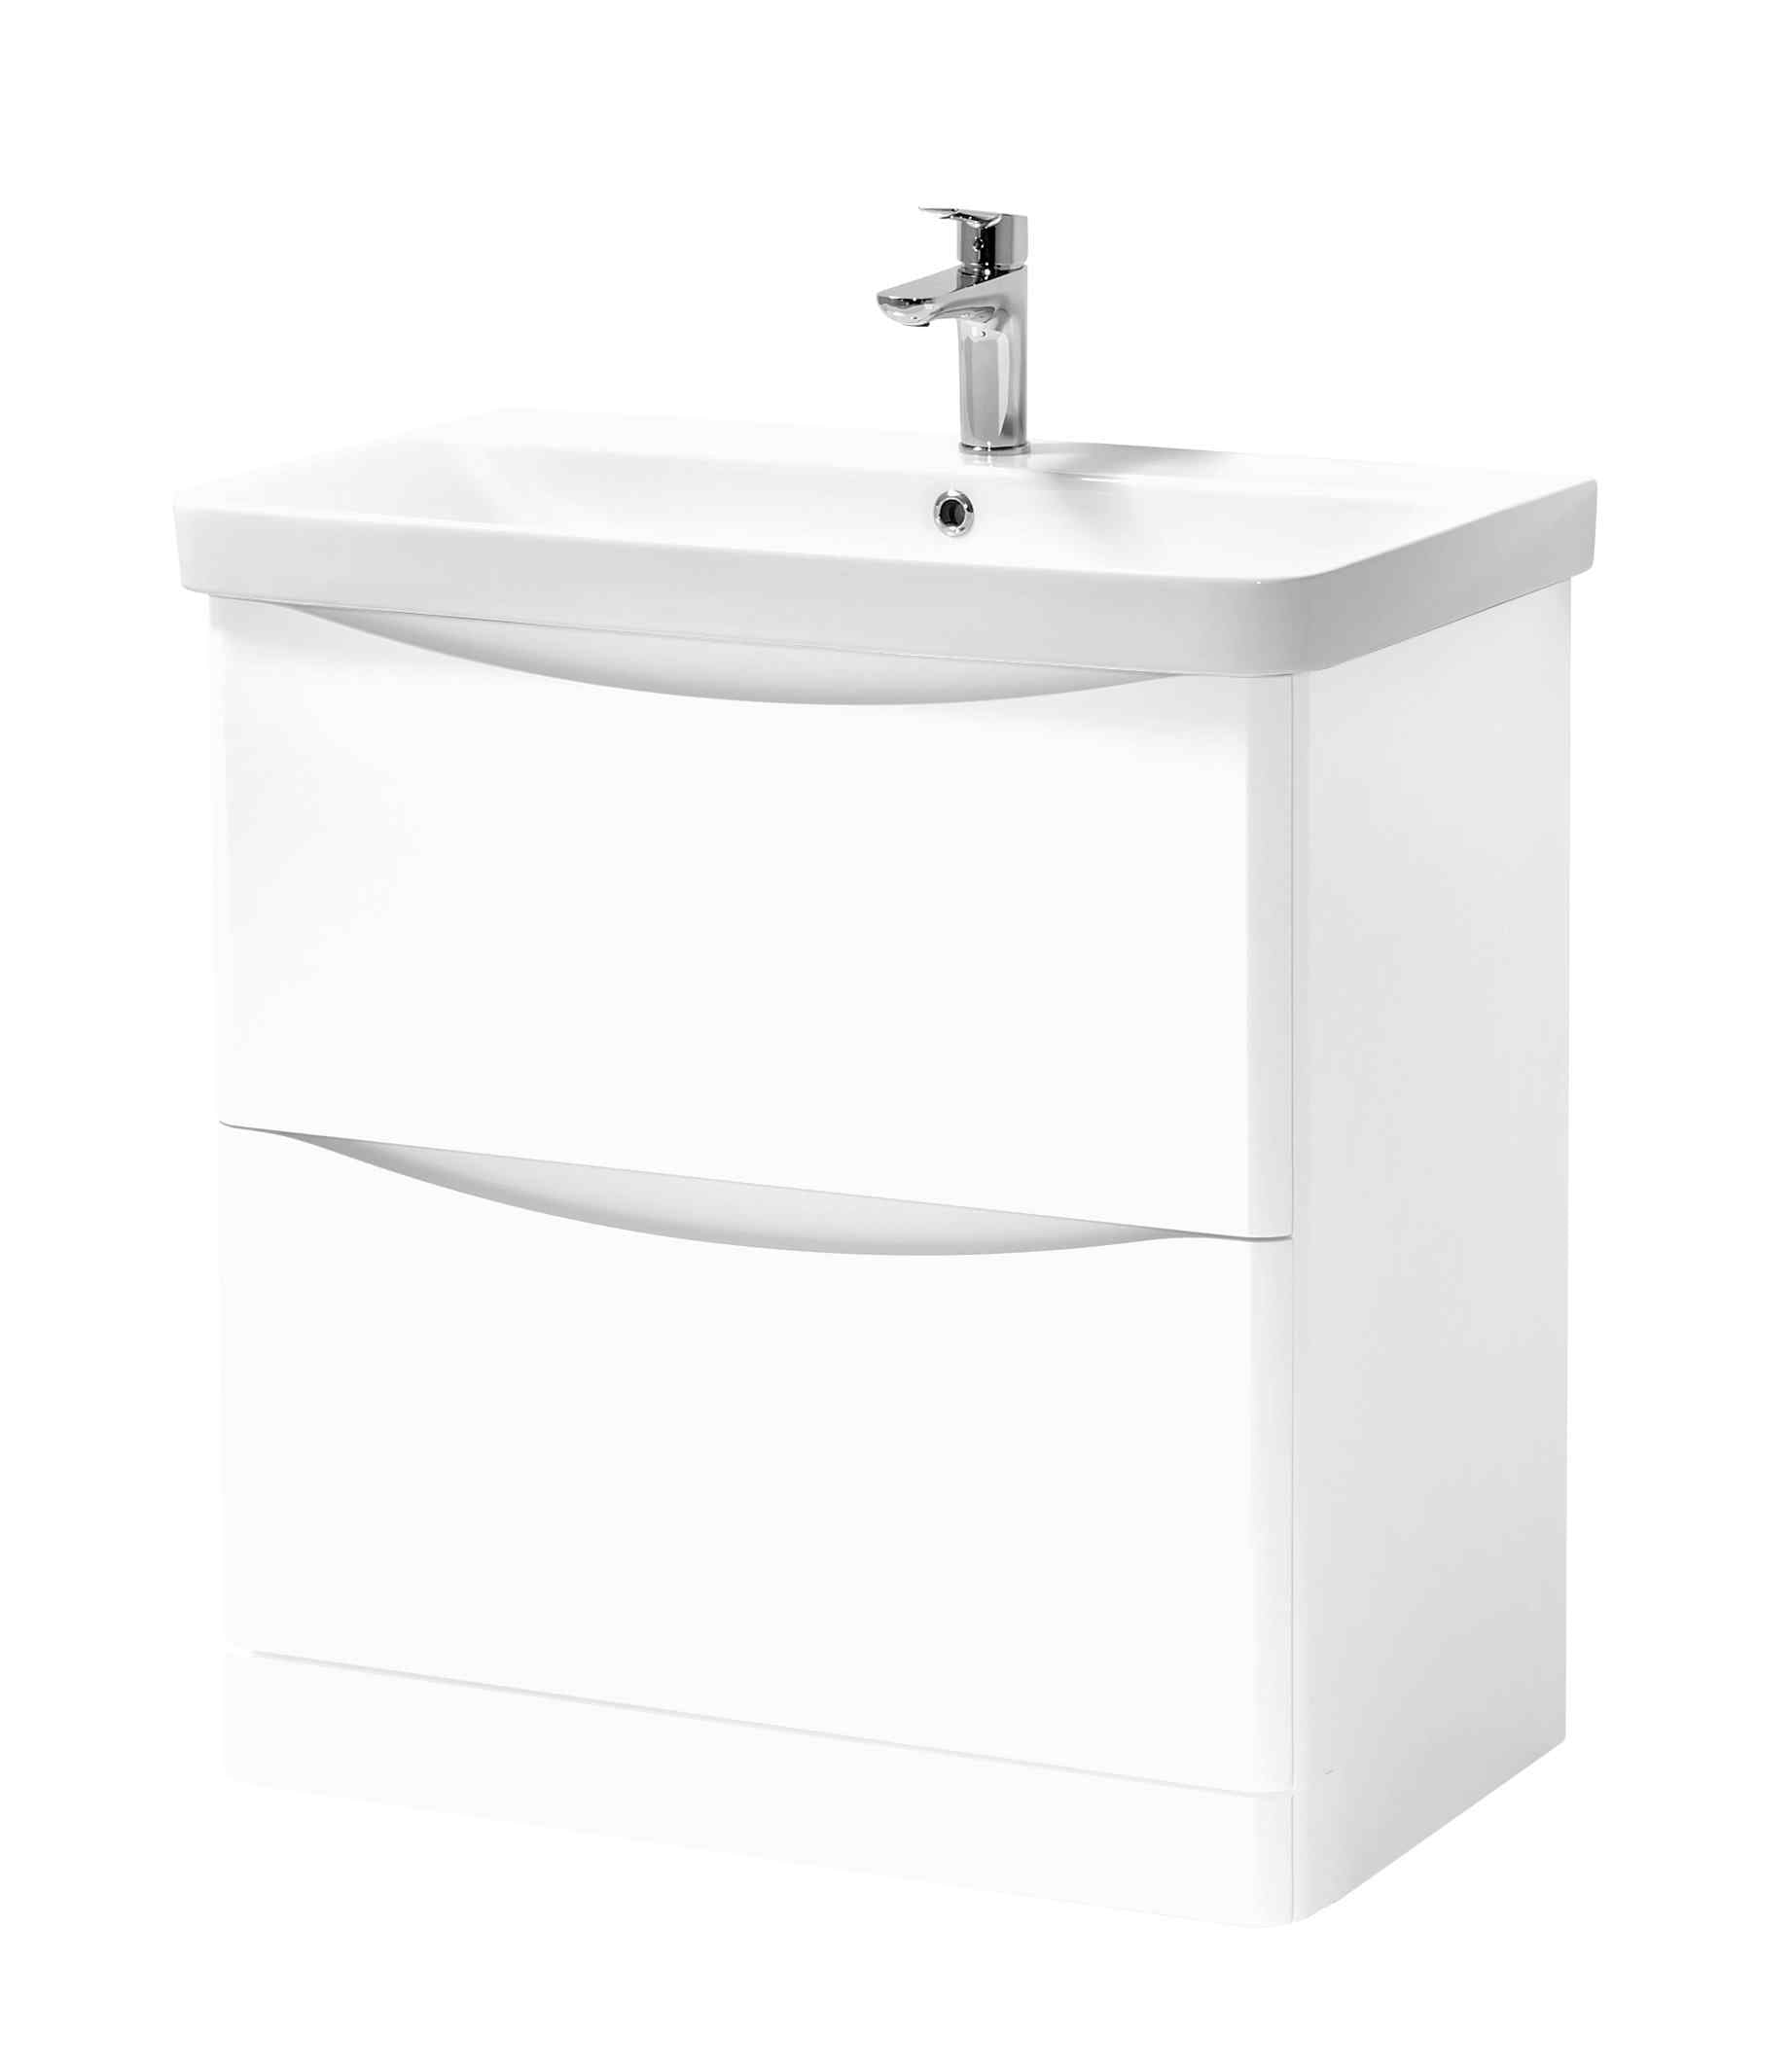 Transform Your Bathroom with Arc White Gloss Furniture: Vanity Unit, Basin, Toilet